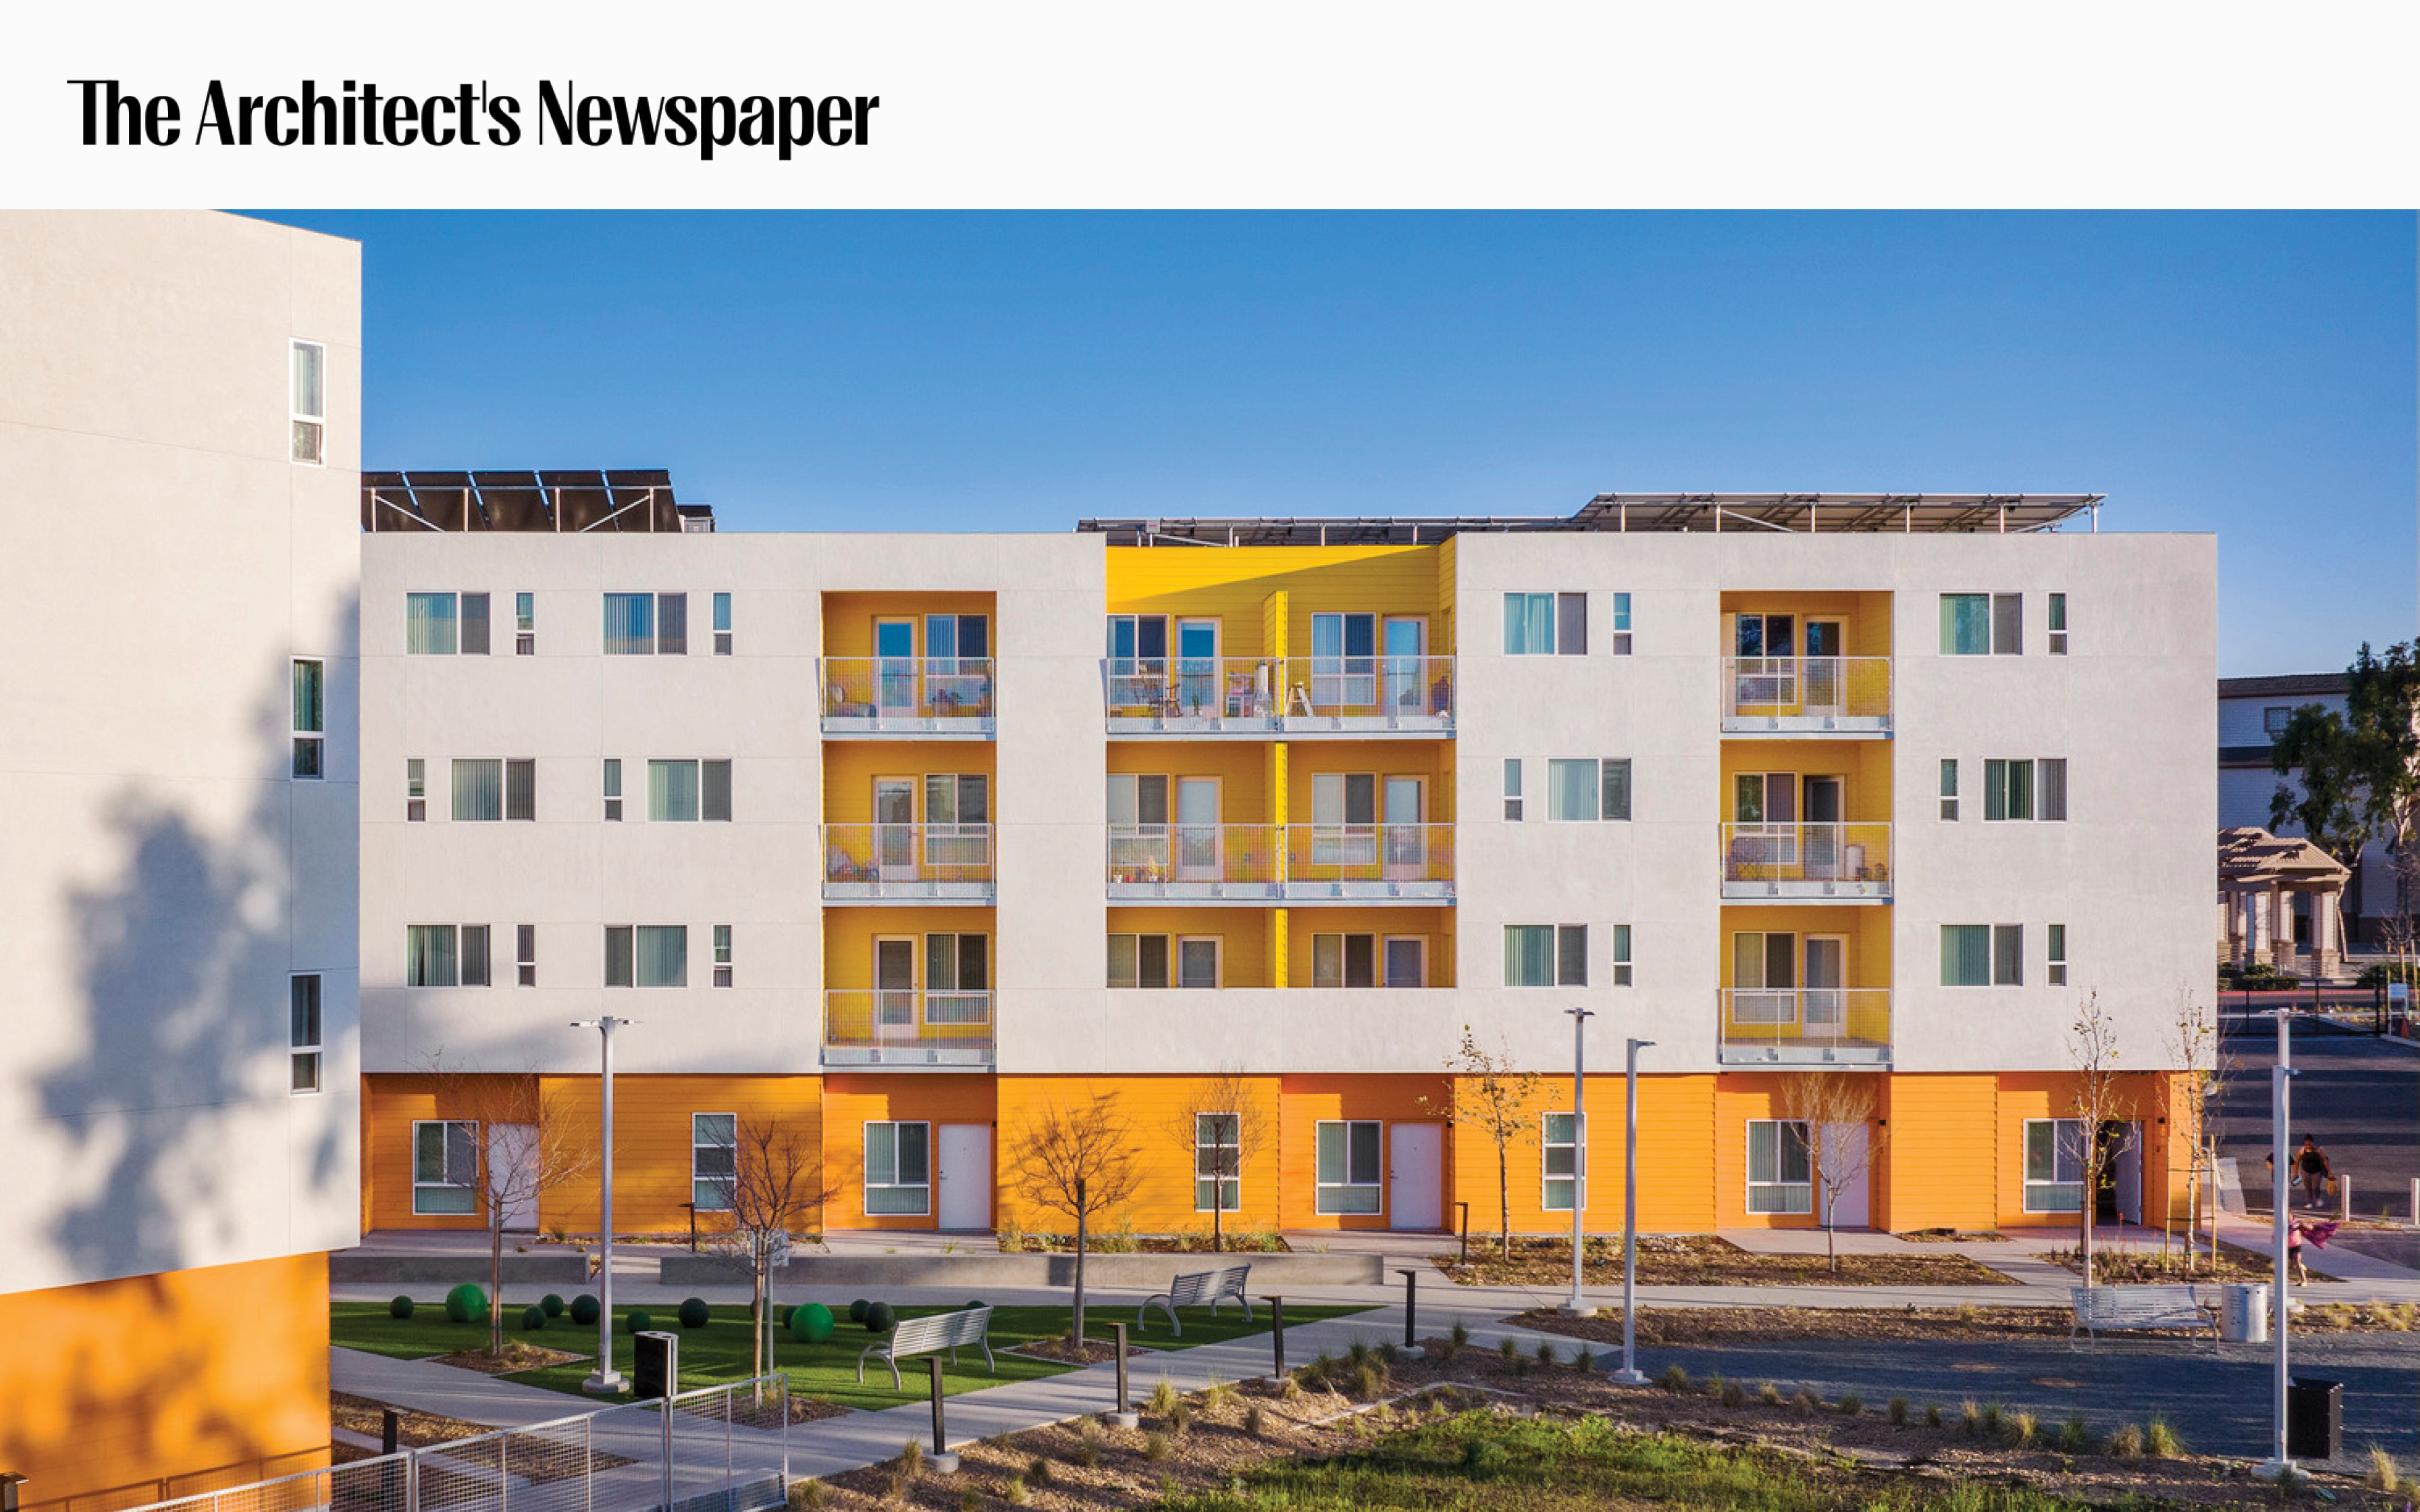 Keeler Court Apartments Published in Architect’s Newspaper